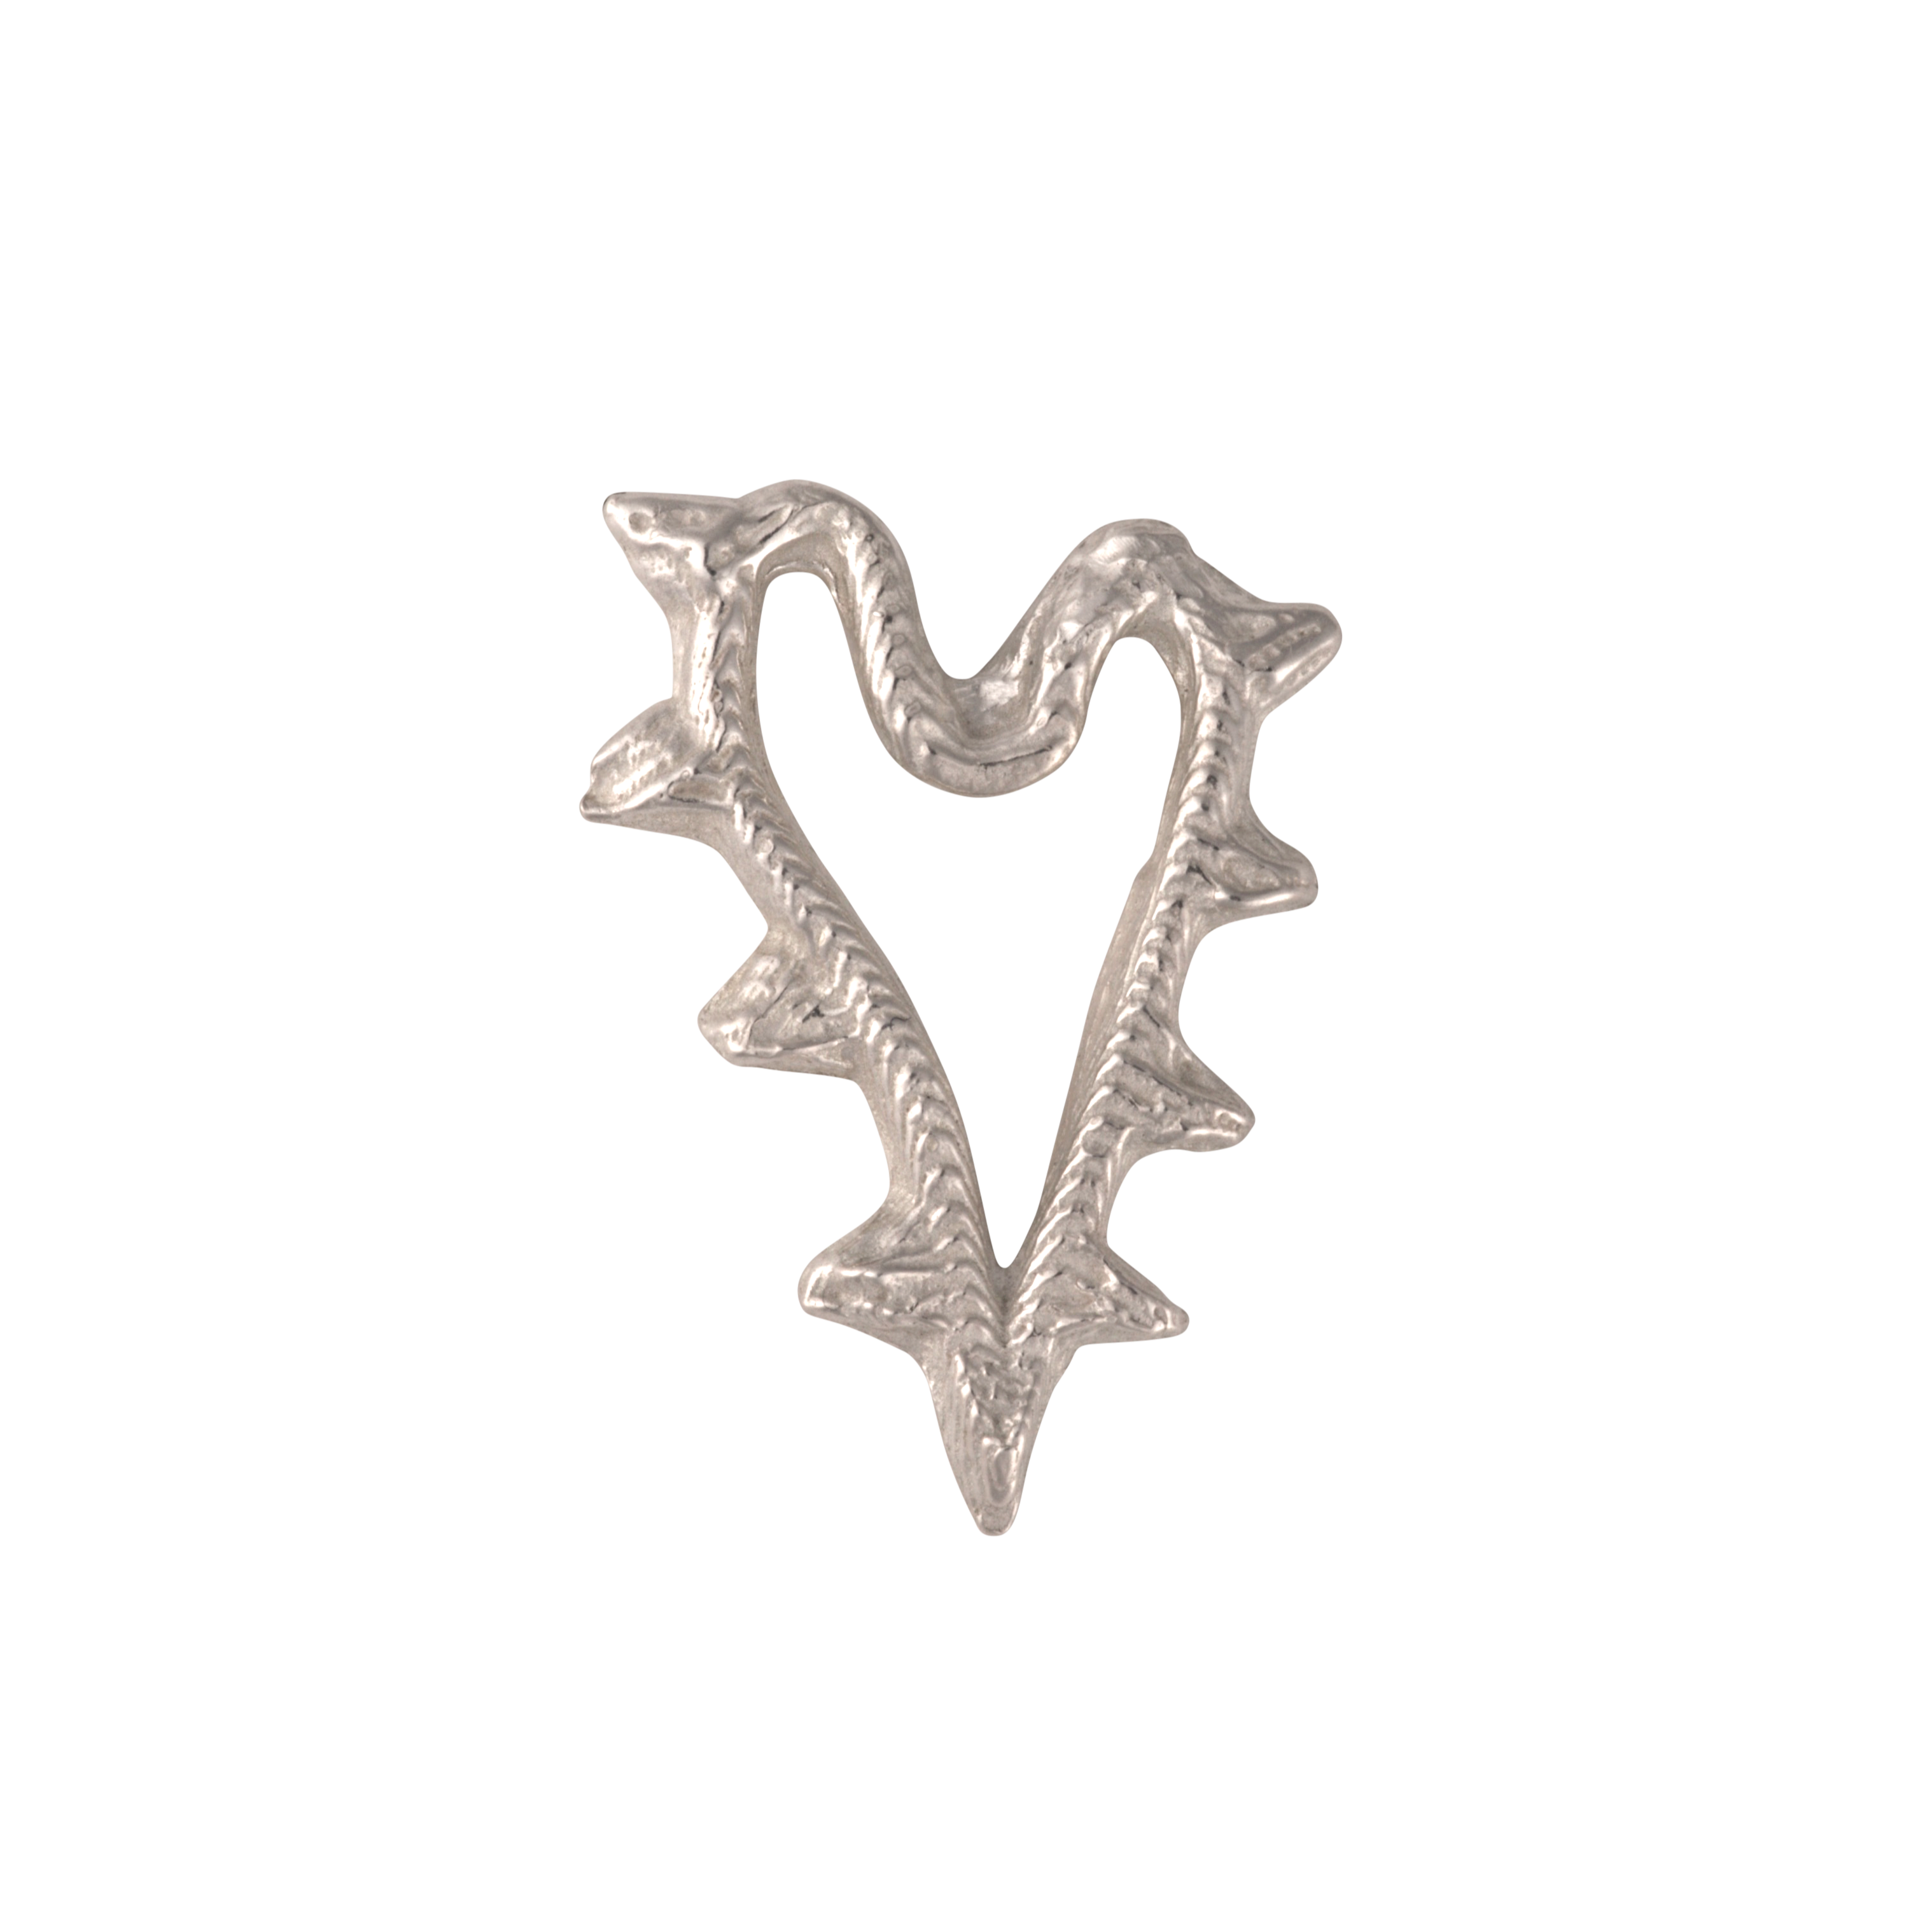 Spiked heart right earring